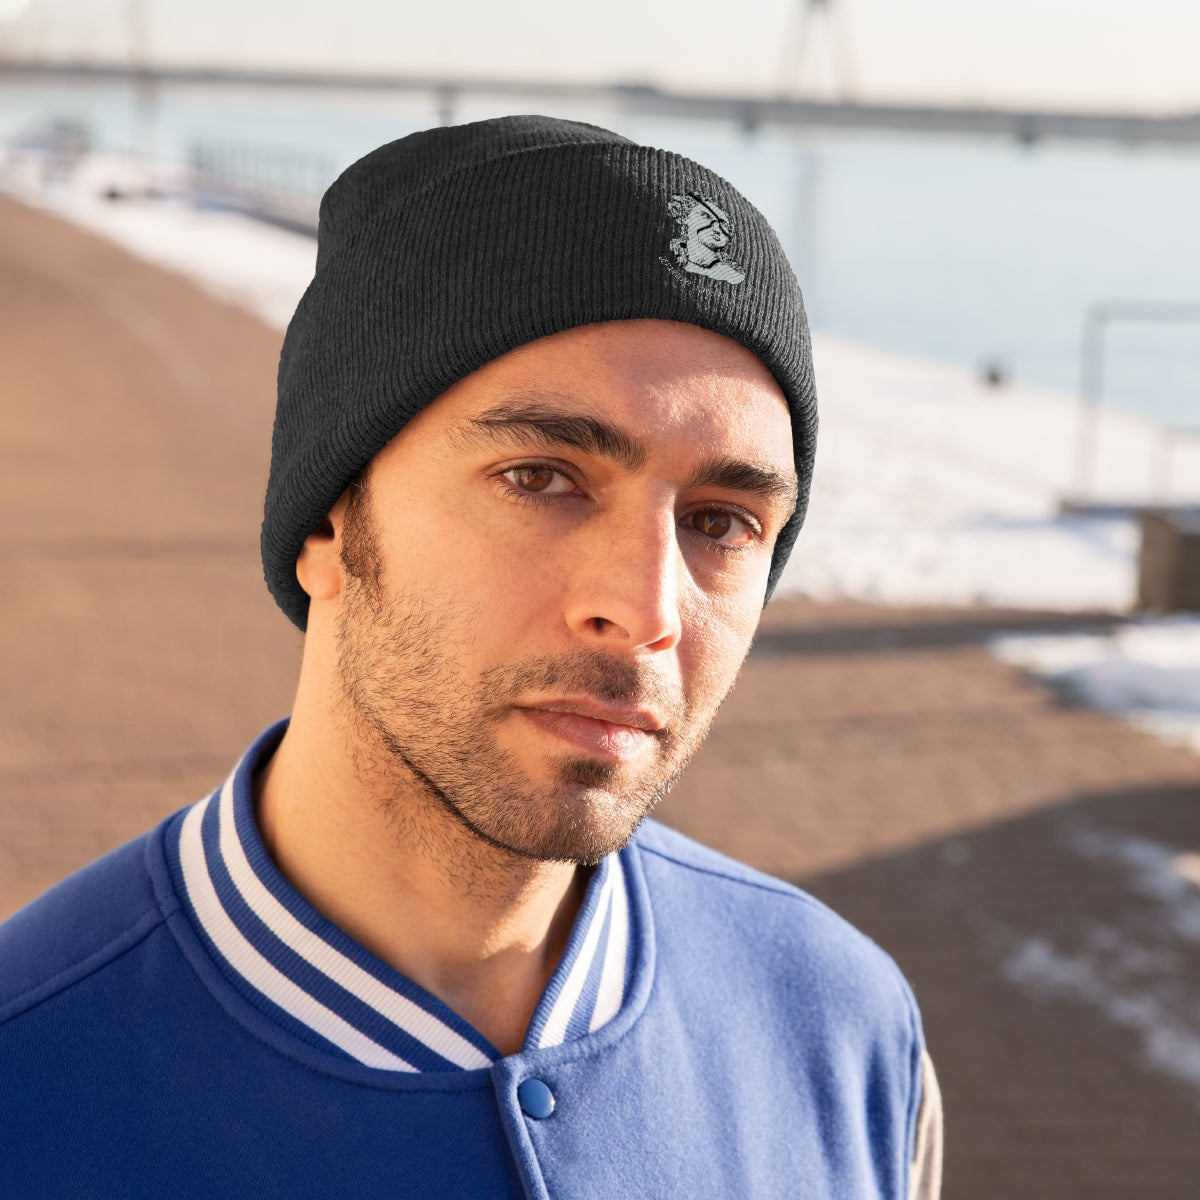 Departure From The Standard Beanie